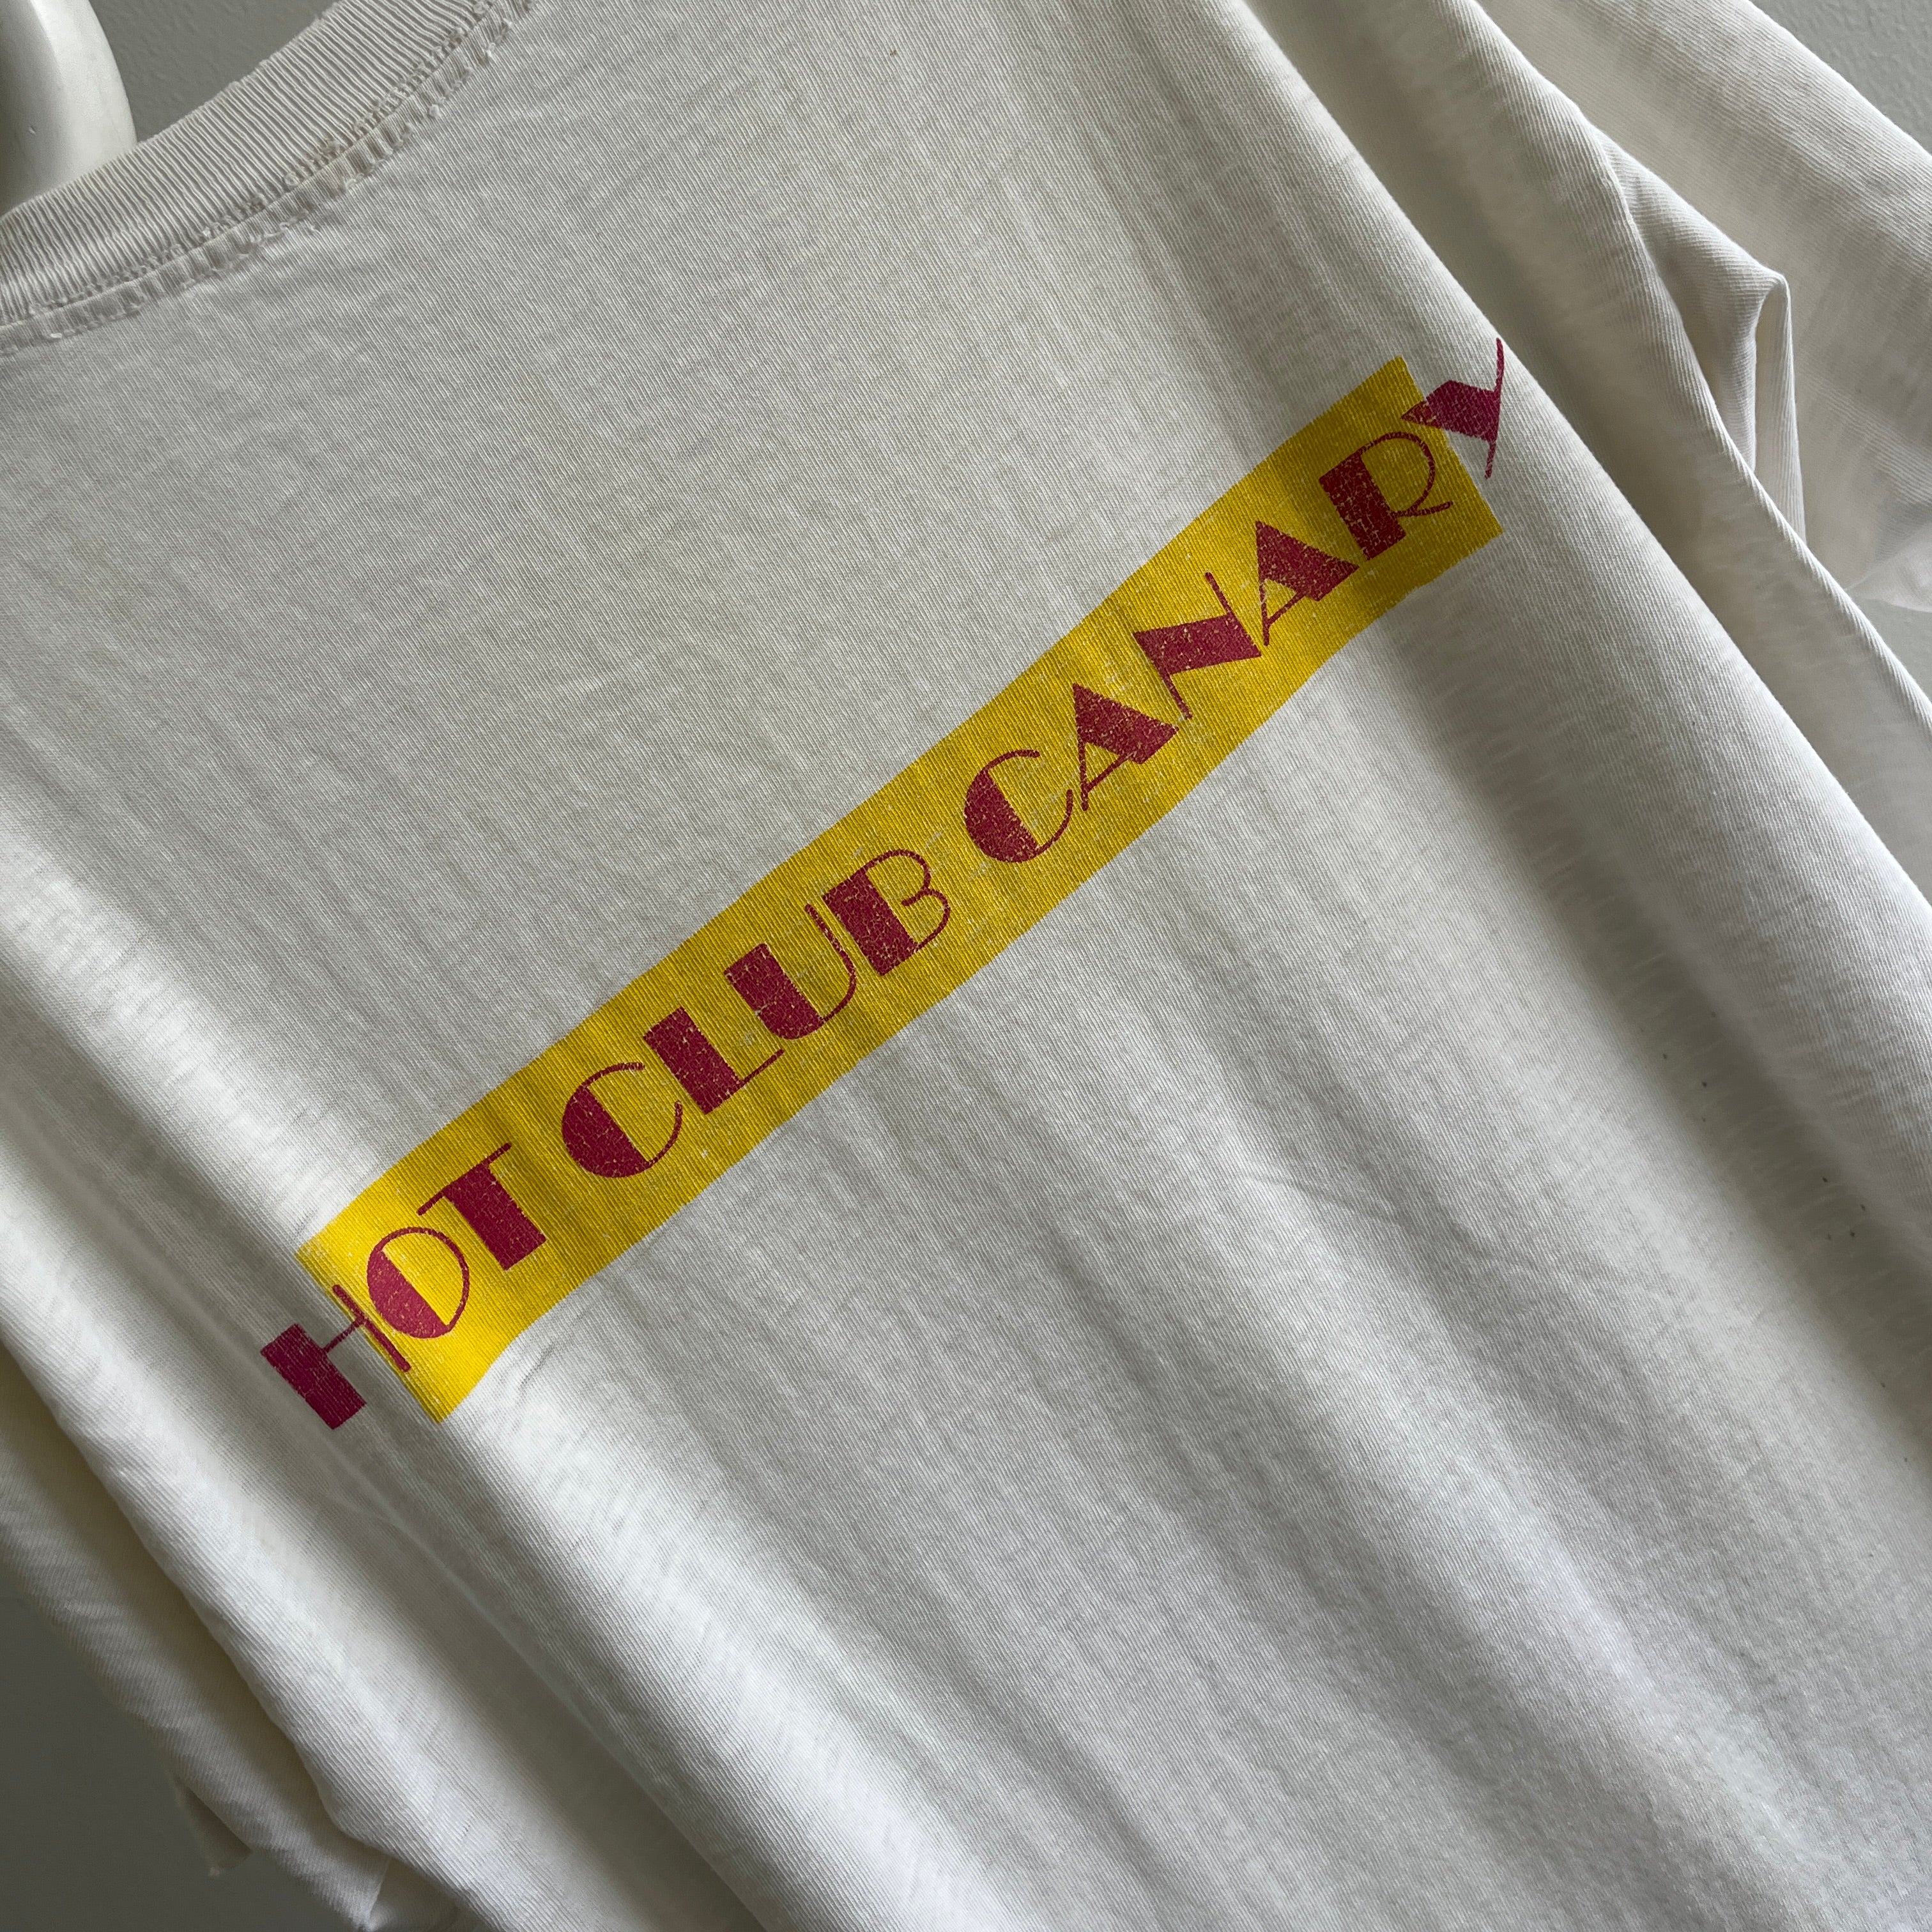 1980s HOT CLUB CANARY Thinned Out and Stained Front and Back T-Shirt - Personal Collection